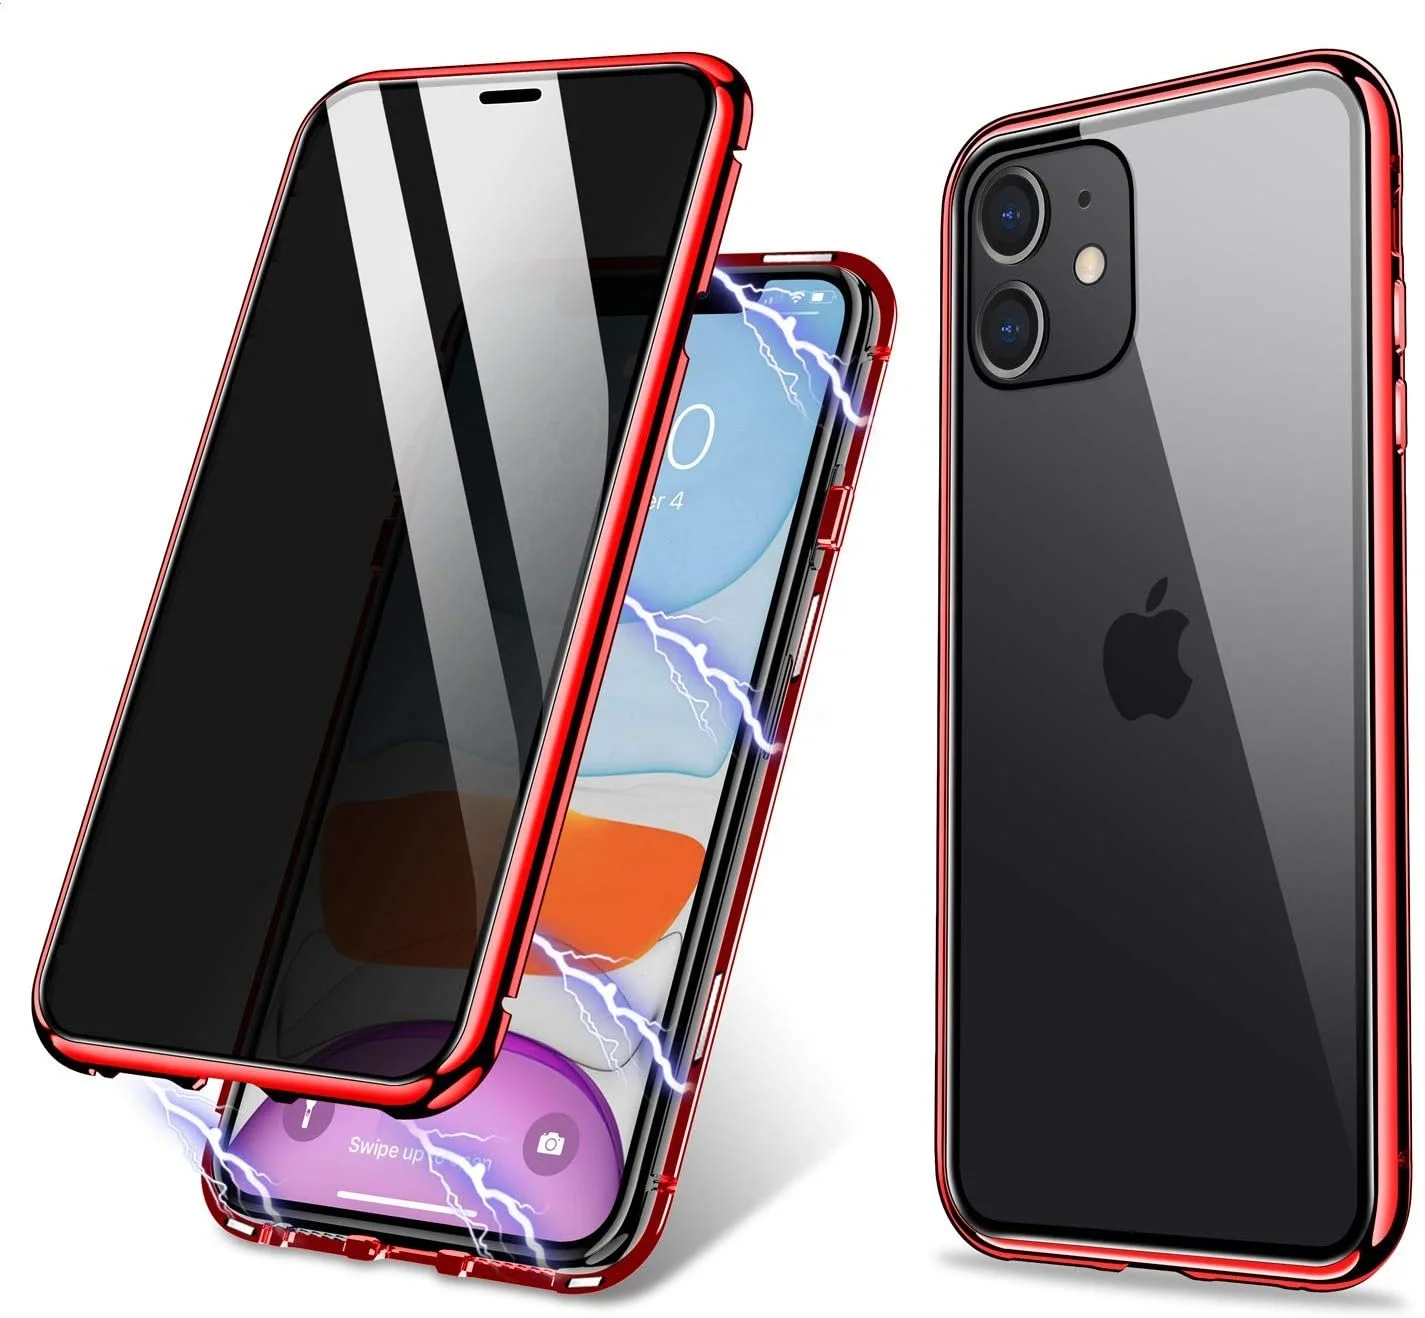 

ZHIKE Fundas Para Celulares New Metal Frame Anti-Peep Double Sided Tempered Glass Magnetic for iPhone 11 New Luxury iPhone Case, Black,green, red